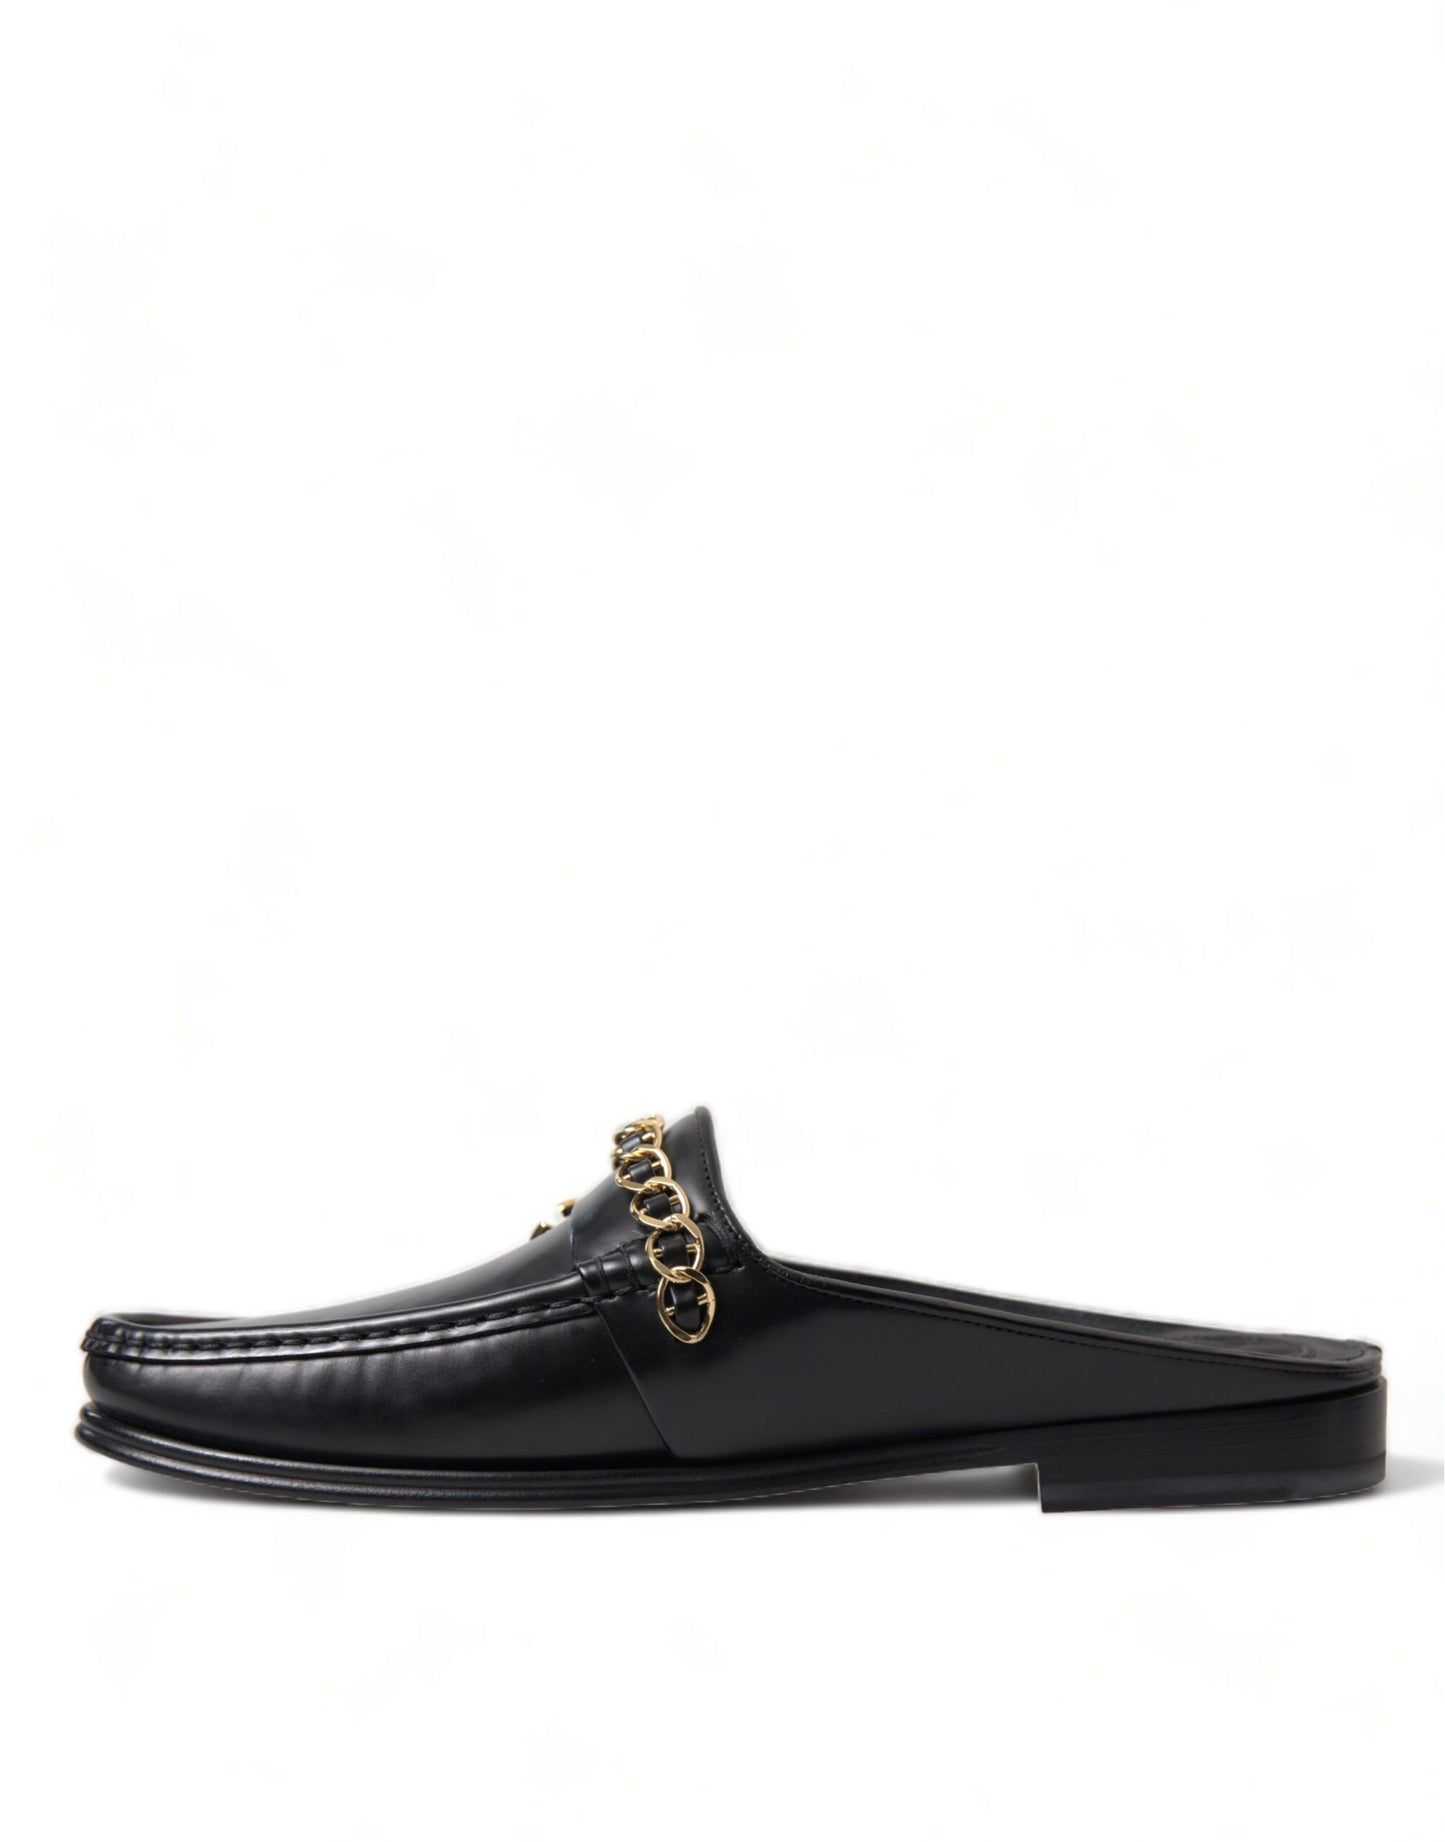 Black Leather Visconti Slippers Dress Shoes